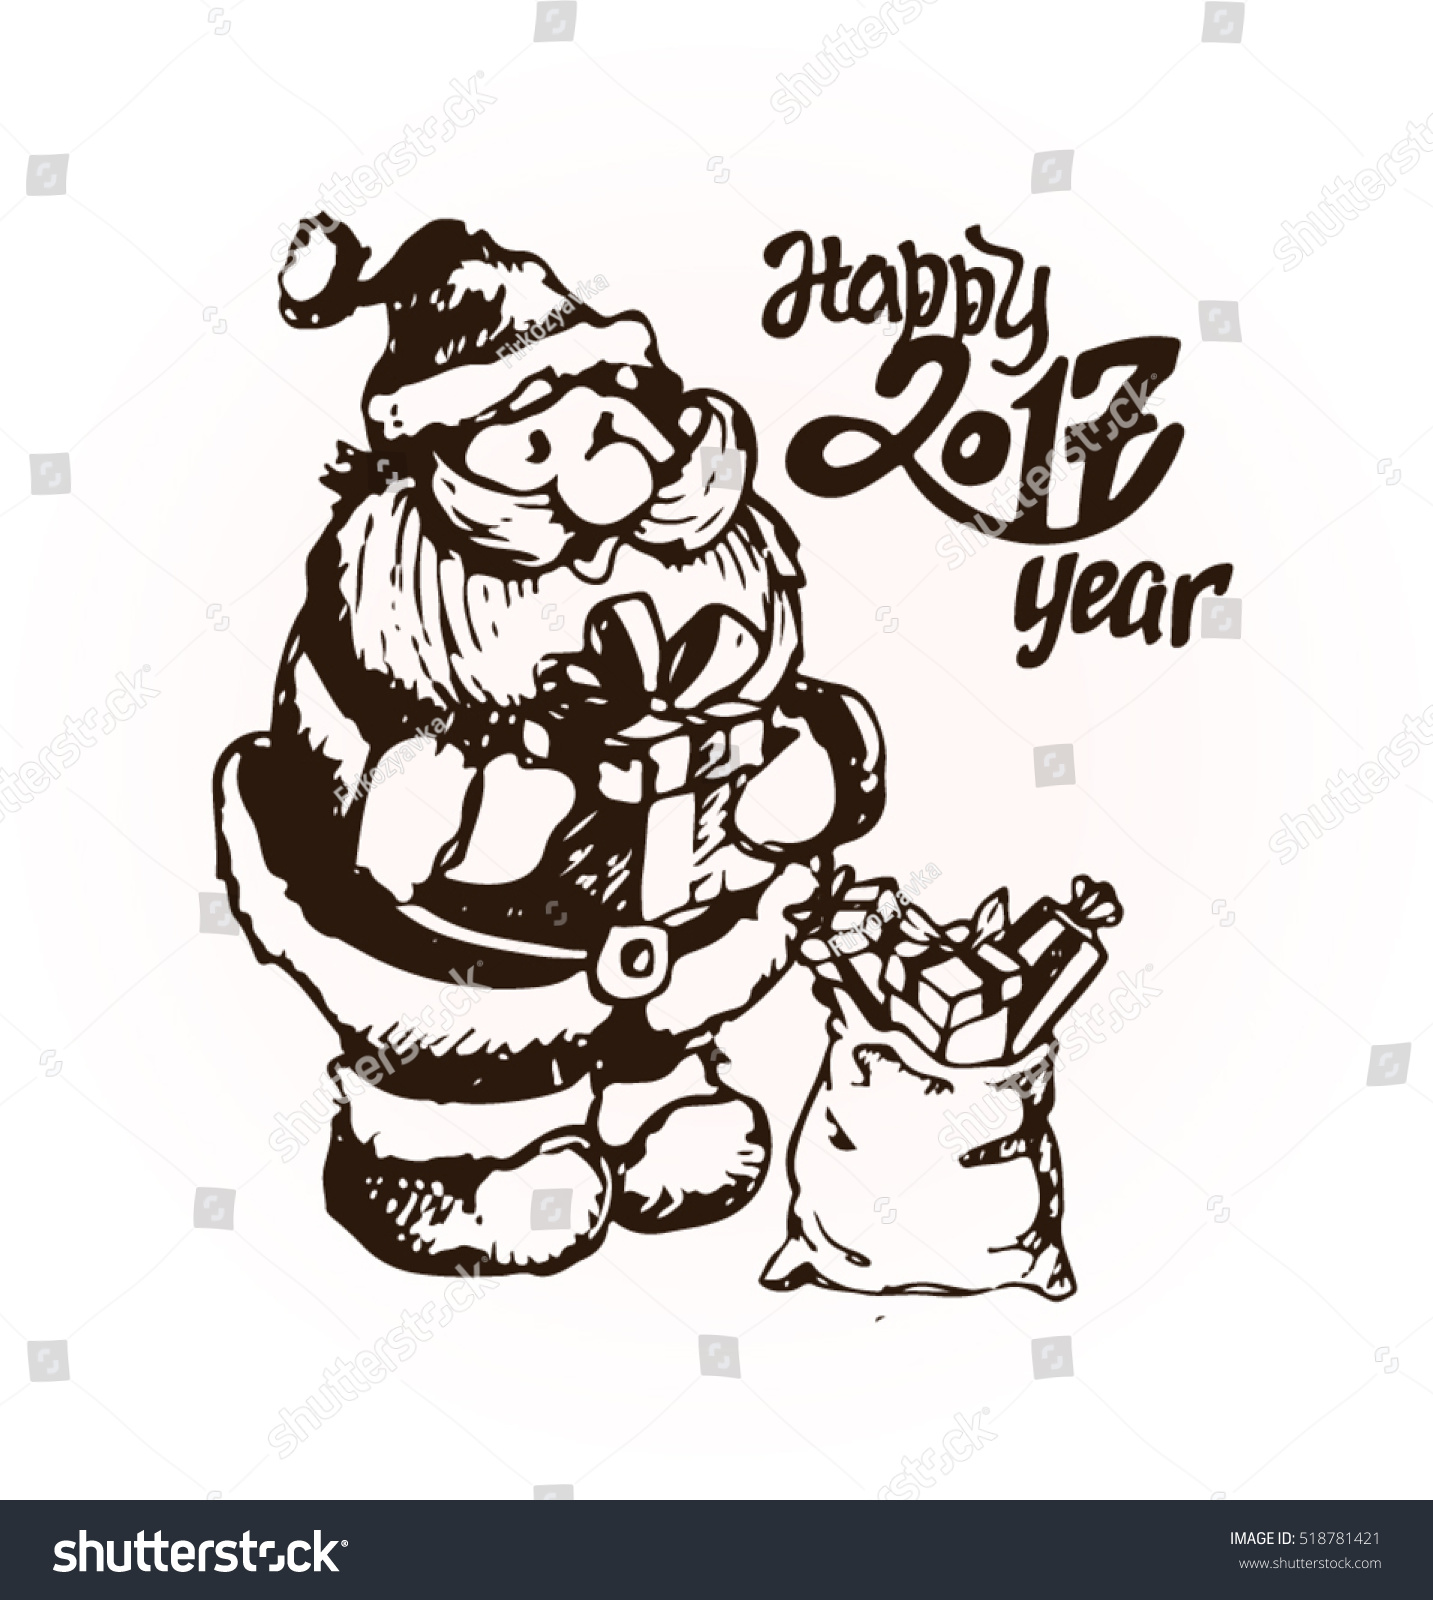 Hand drawn Santa Clause Christmas and New Year illustration Doodle funny Santa Claus Happy new year Merry Christmas